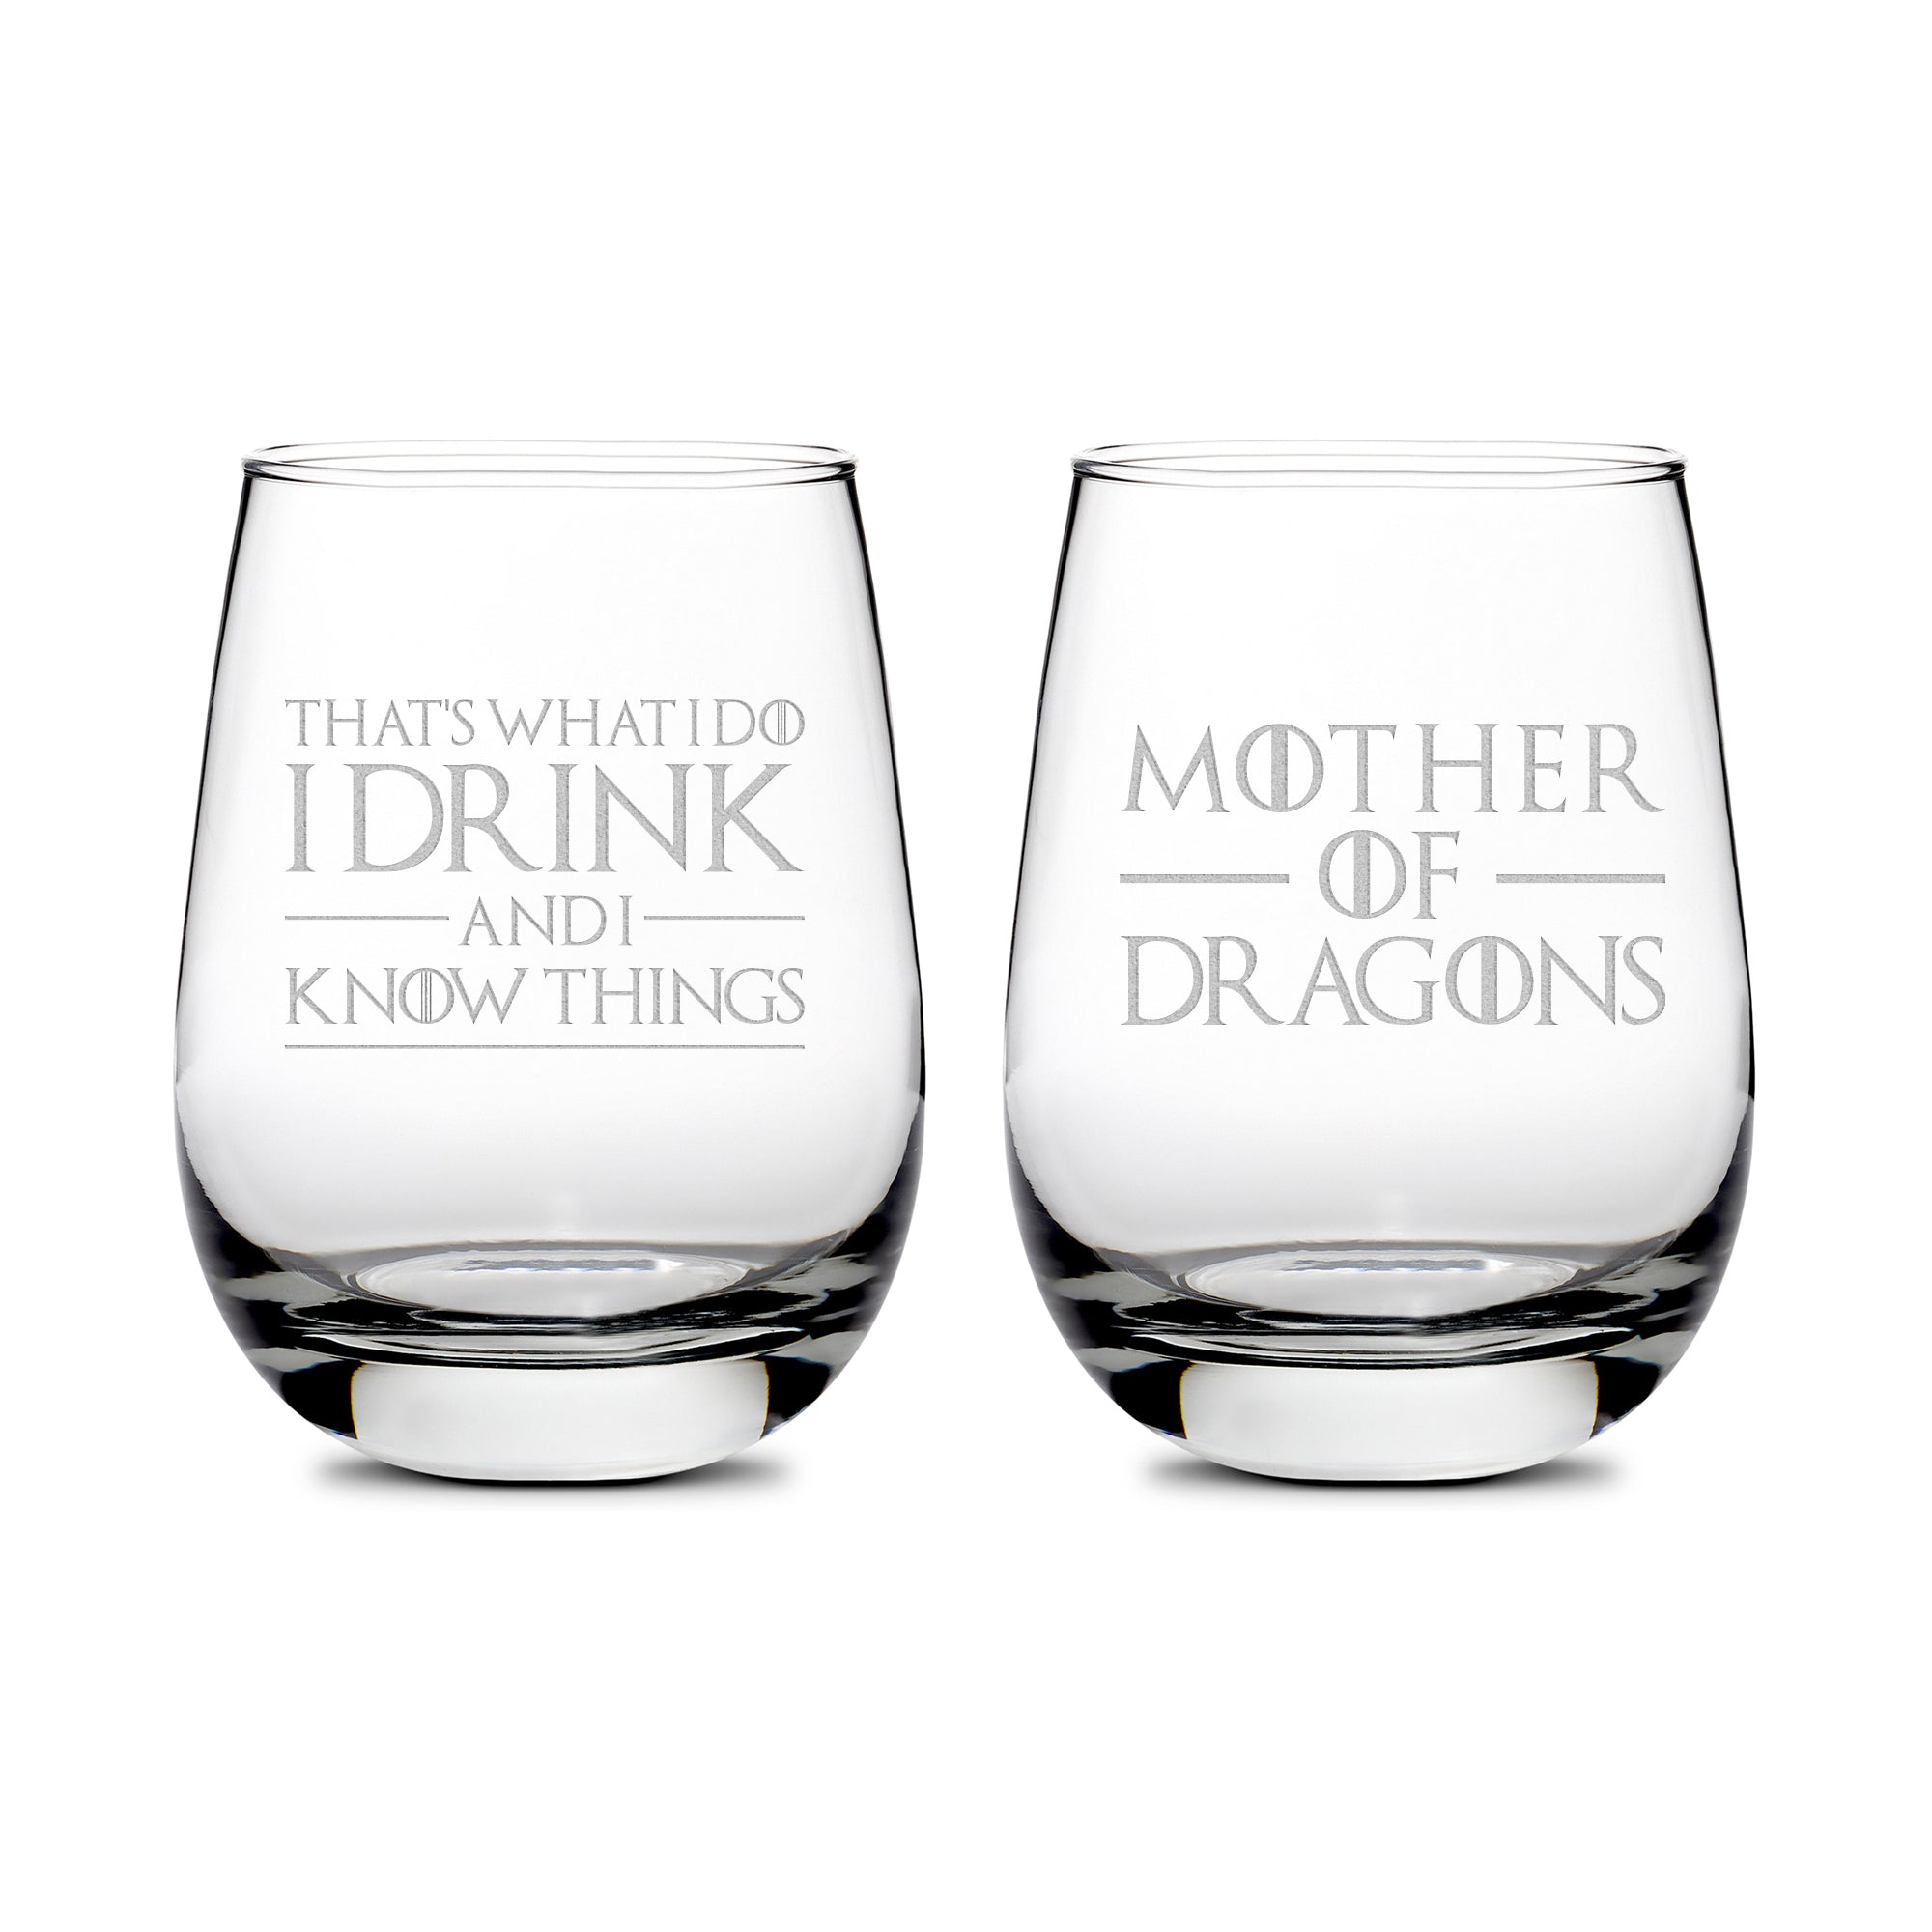 Premium Wine Glasses, Game of Thrones, I Drink and I Know Things, Mother of Dragons, 16oz (Set of 2)